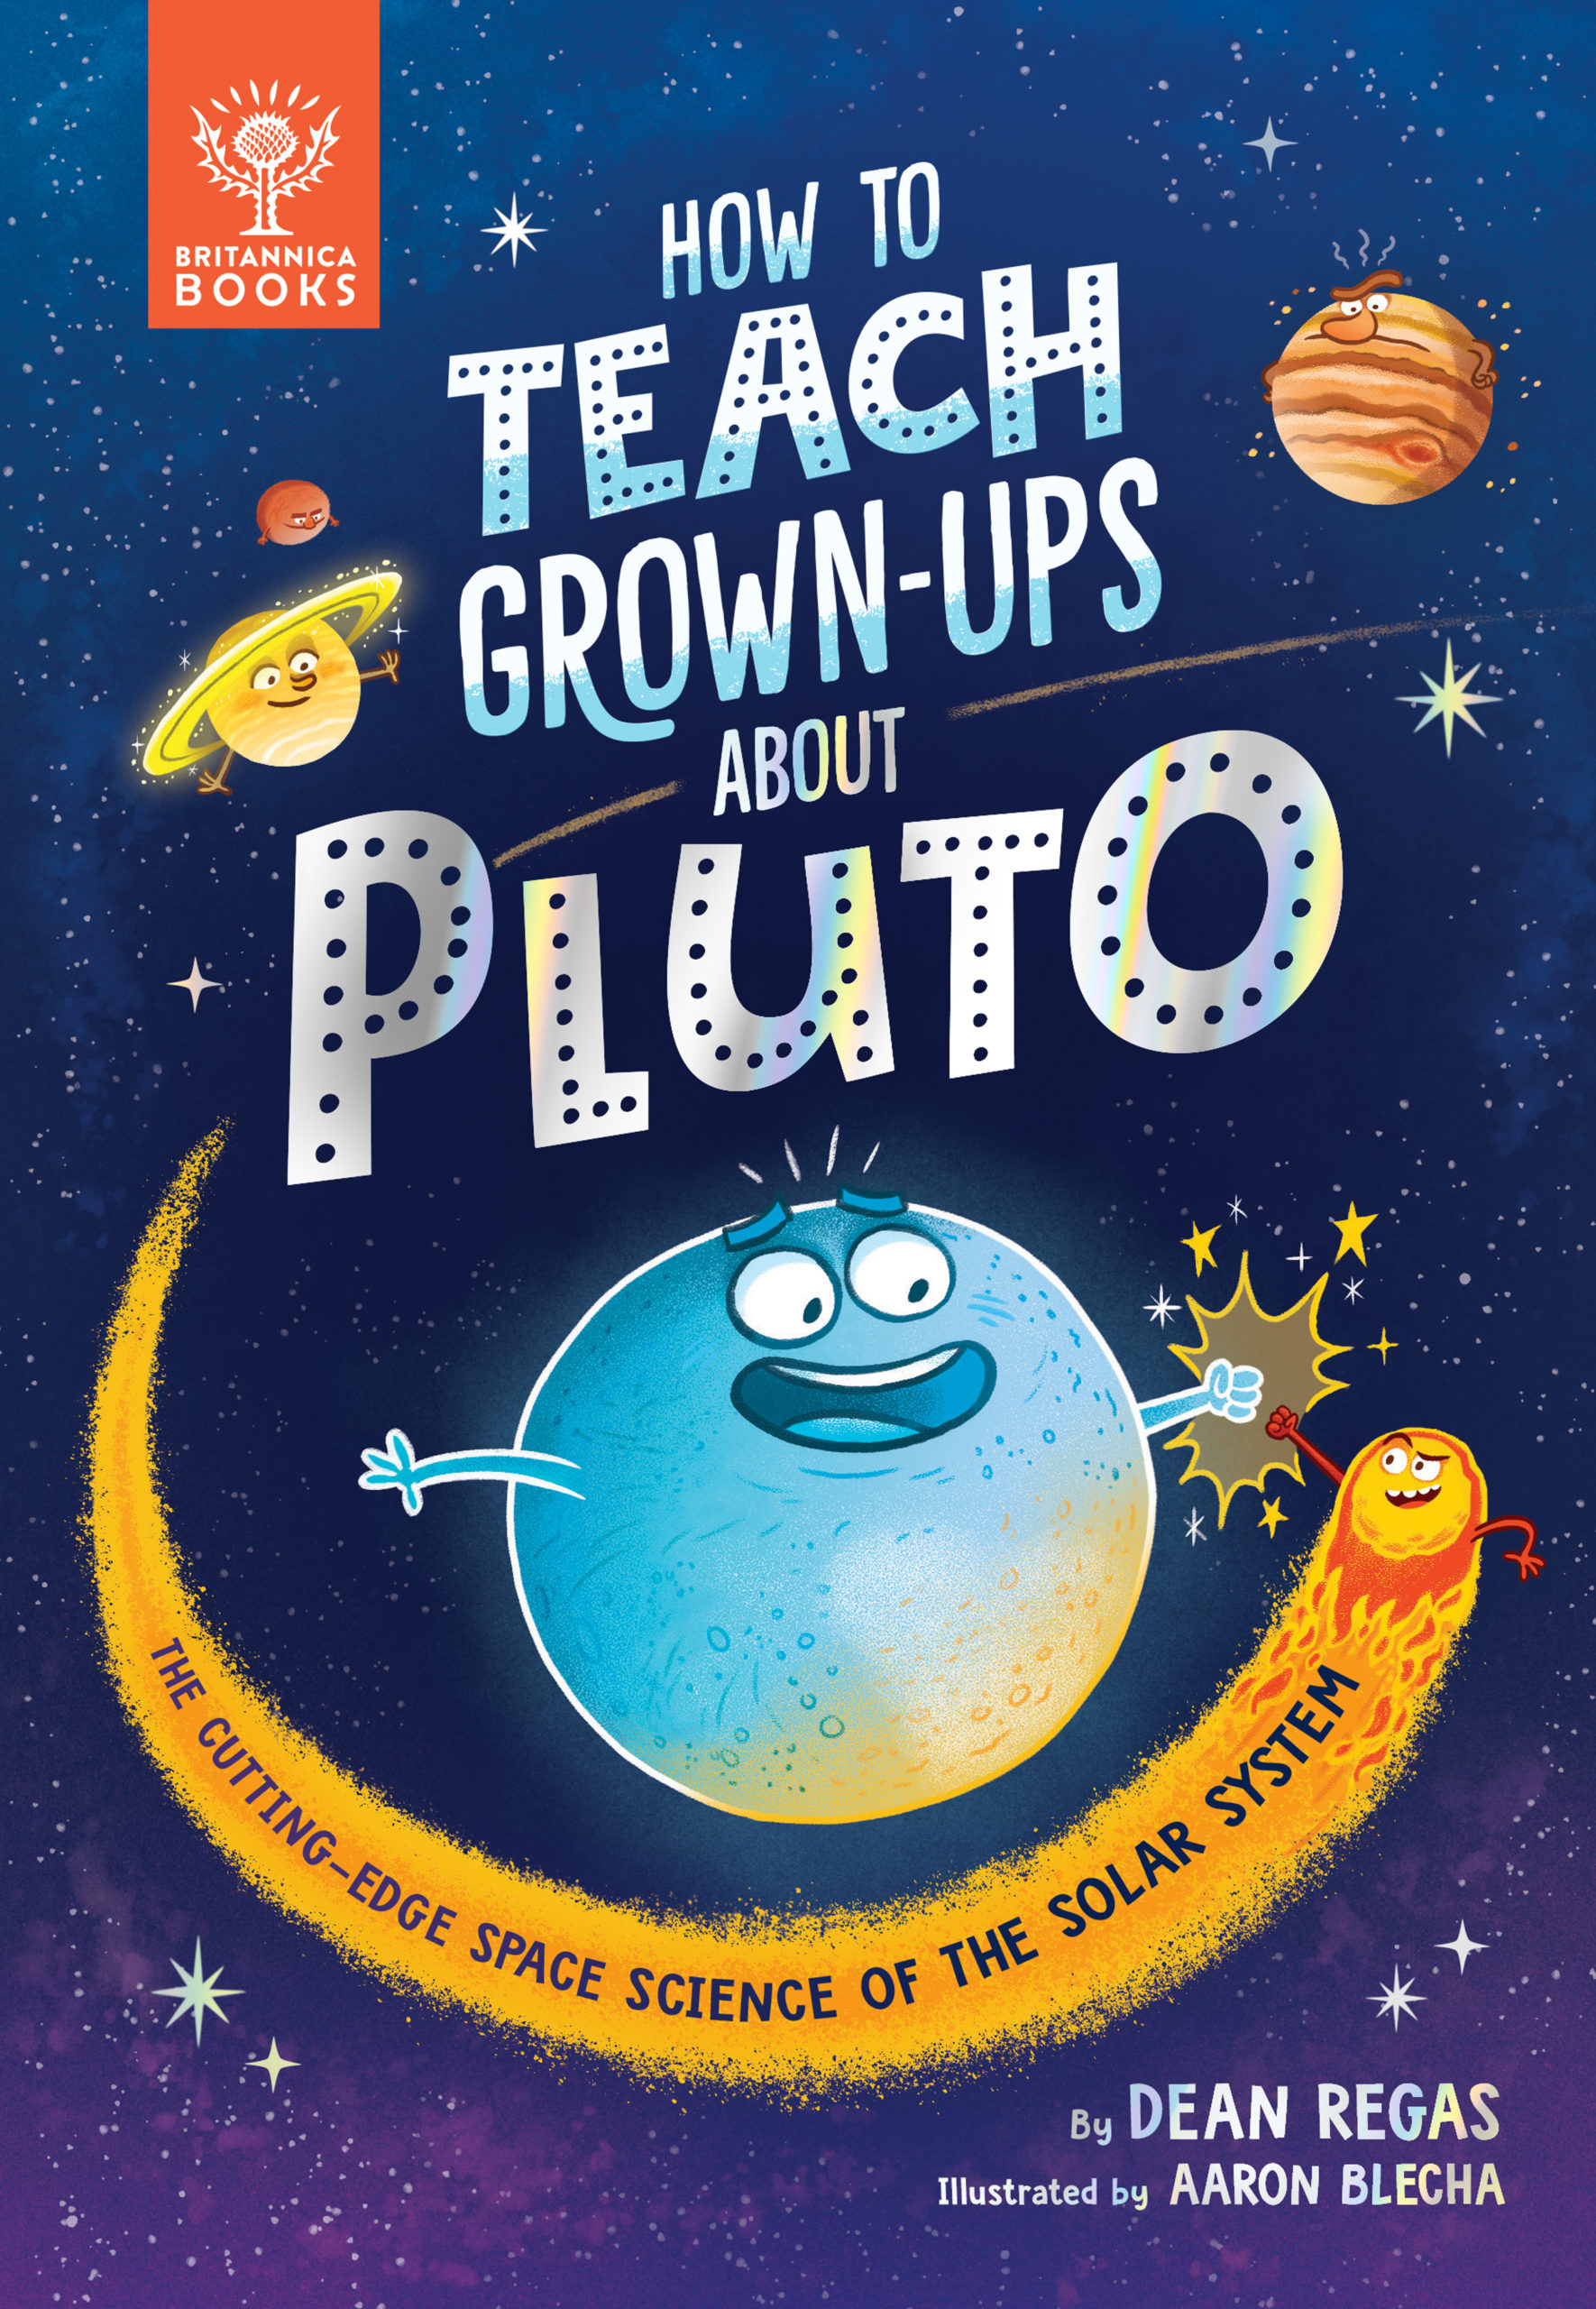 How to Teach Grown-Ups About Pluto